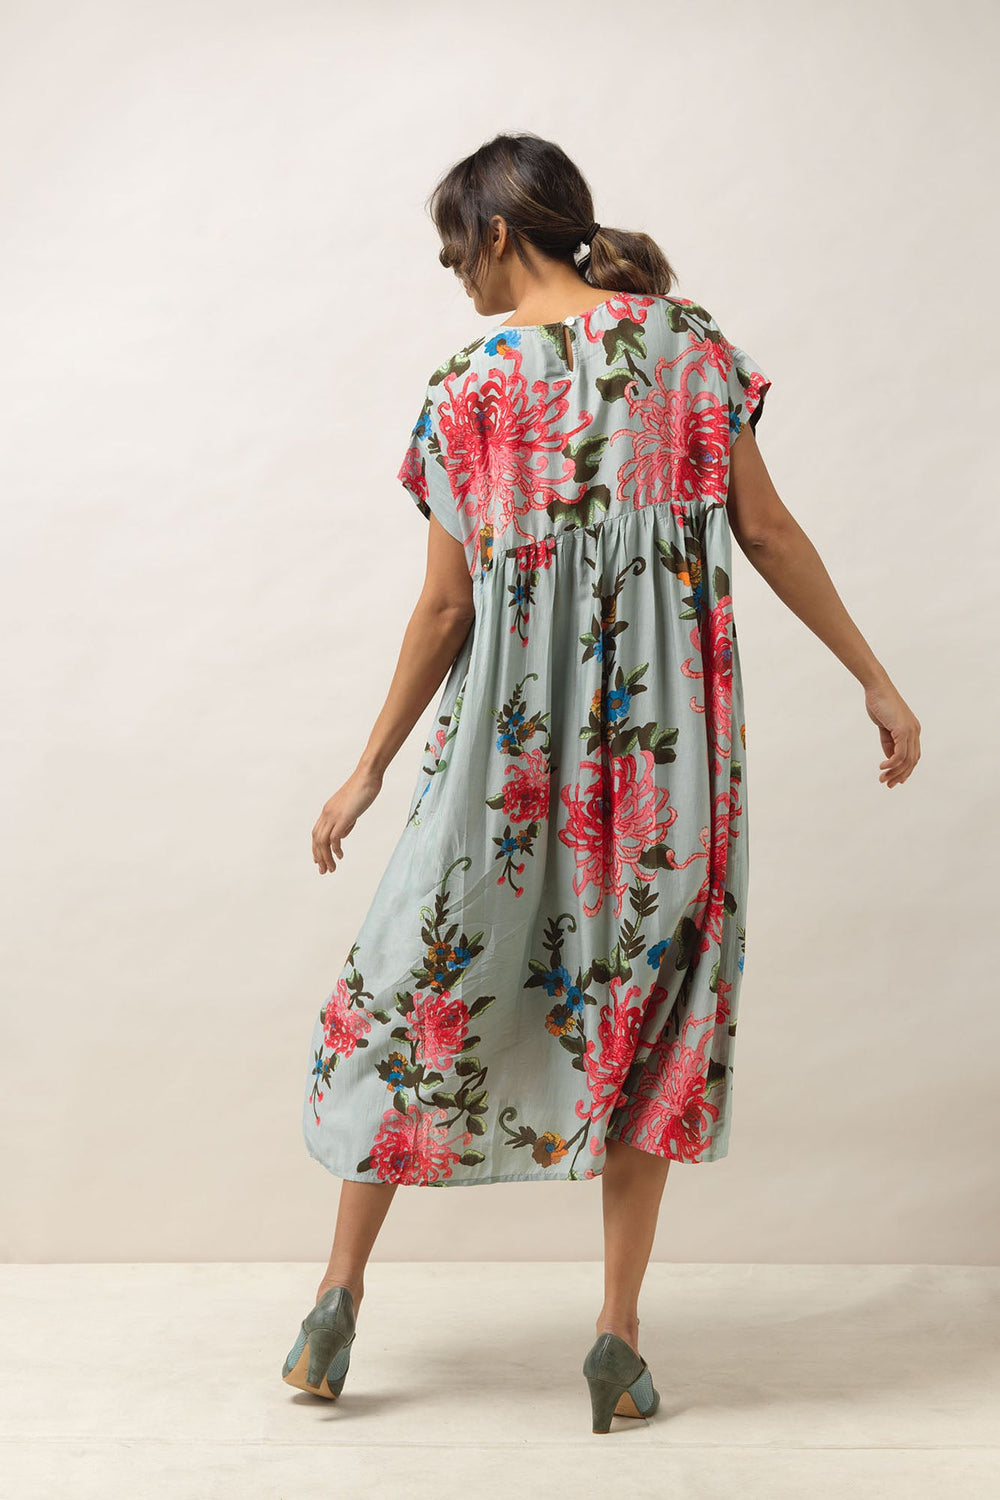 Women's short sleeve pleated dress in aqua with chrysanthemum print by One Hundred Stars